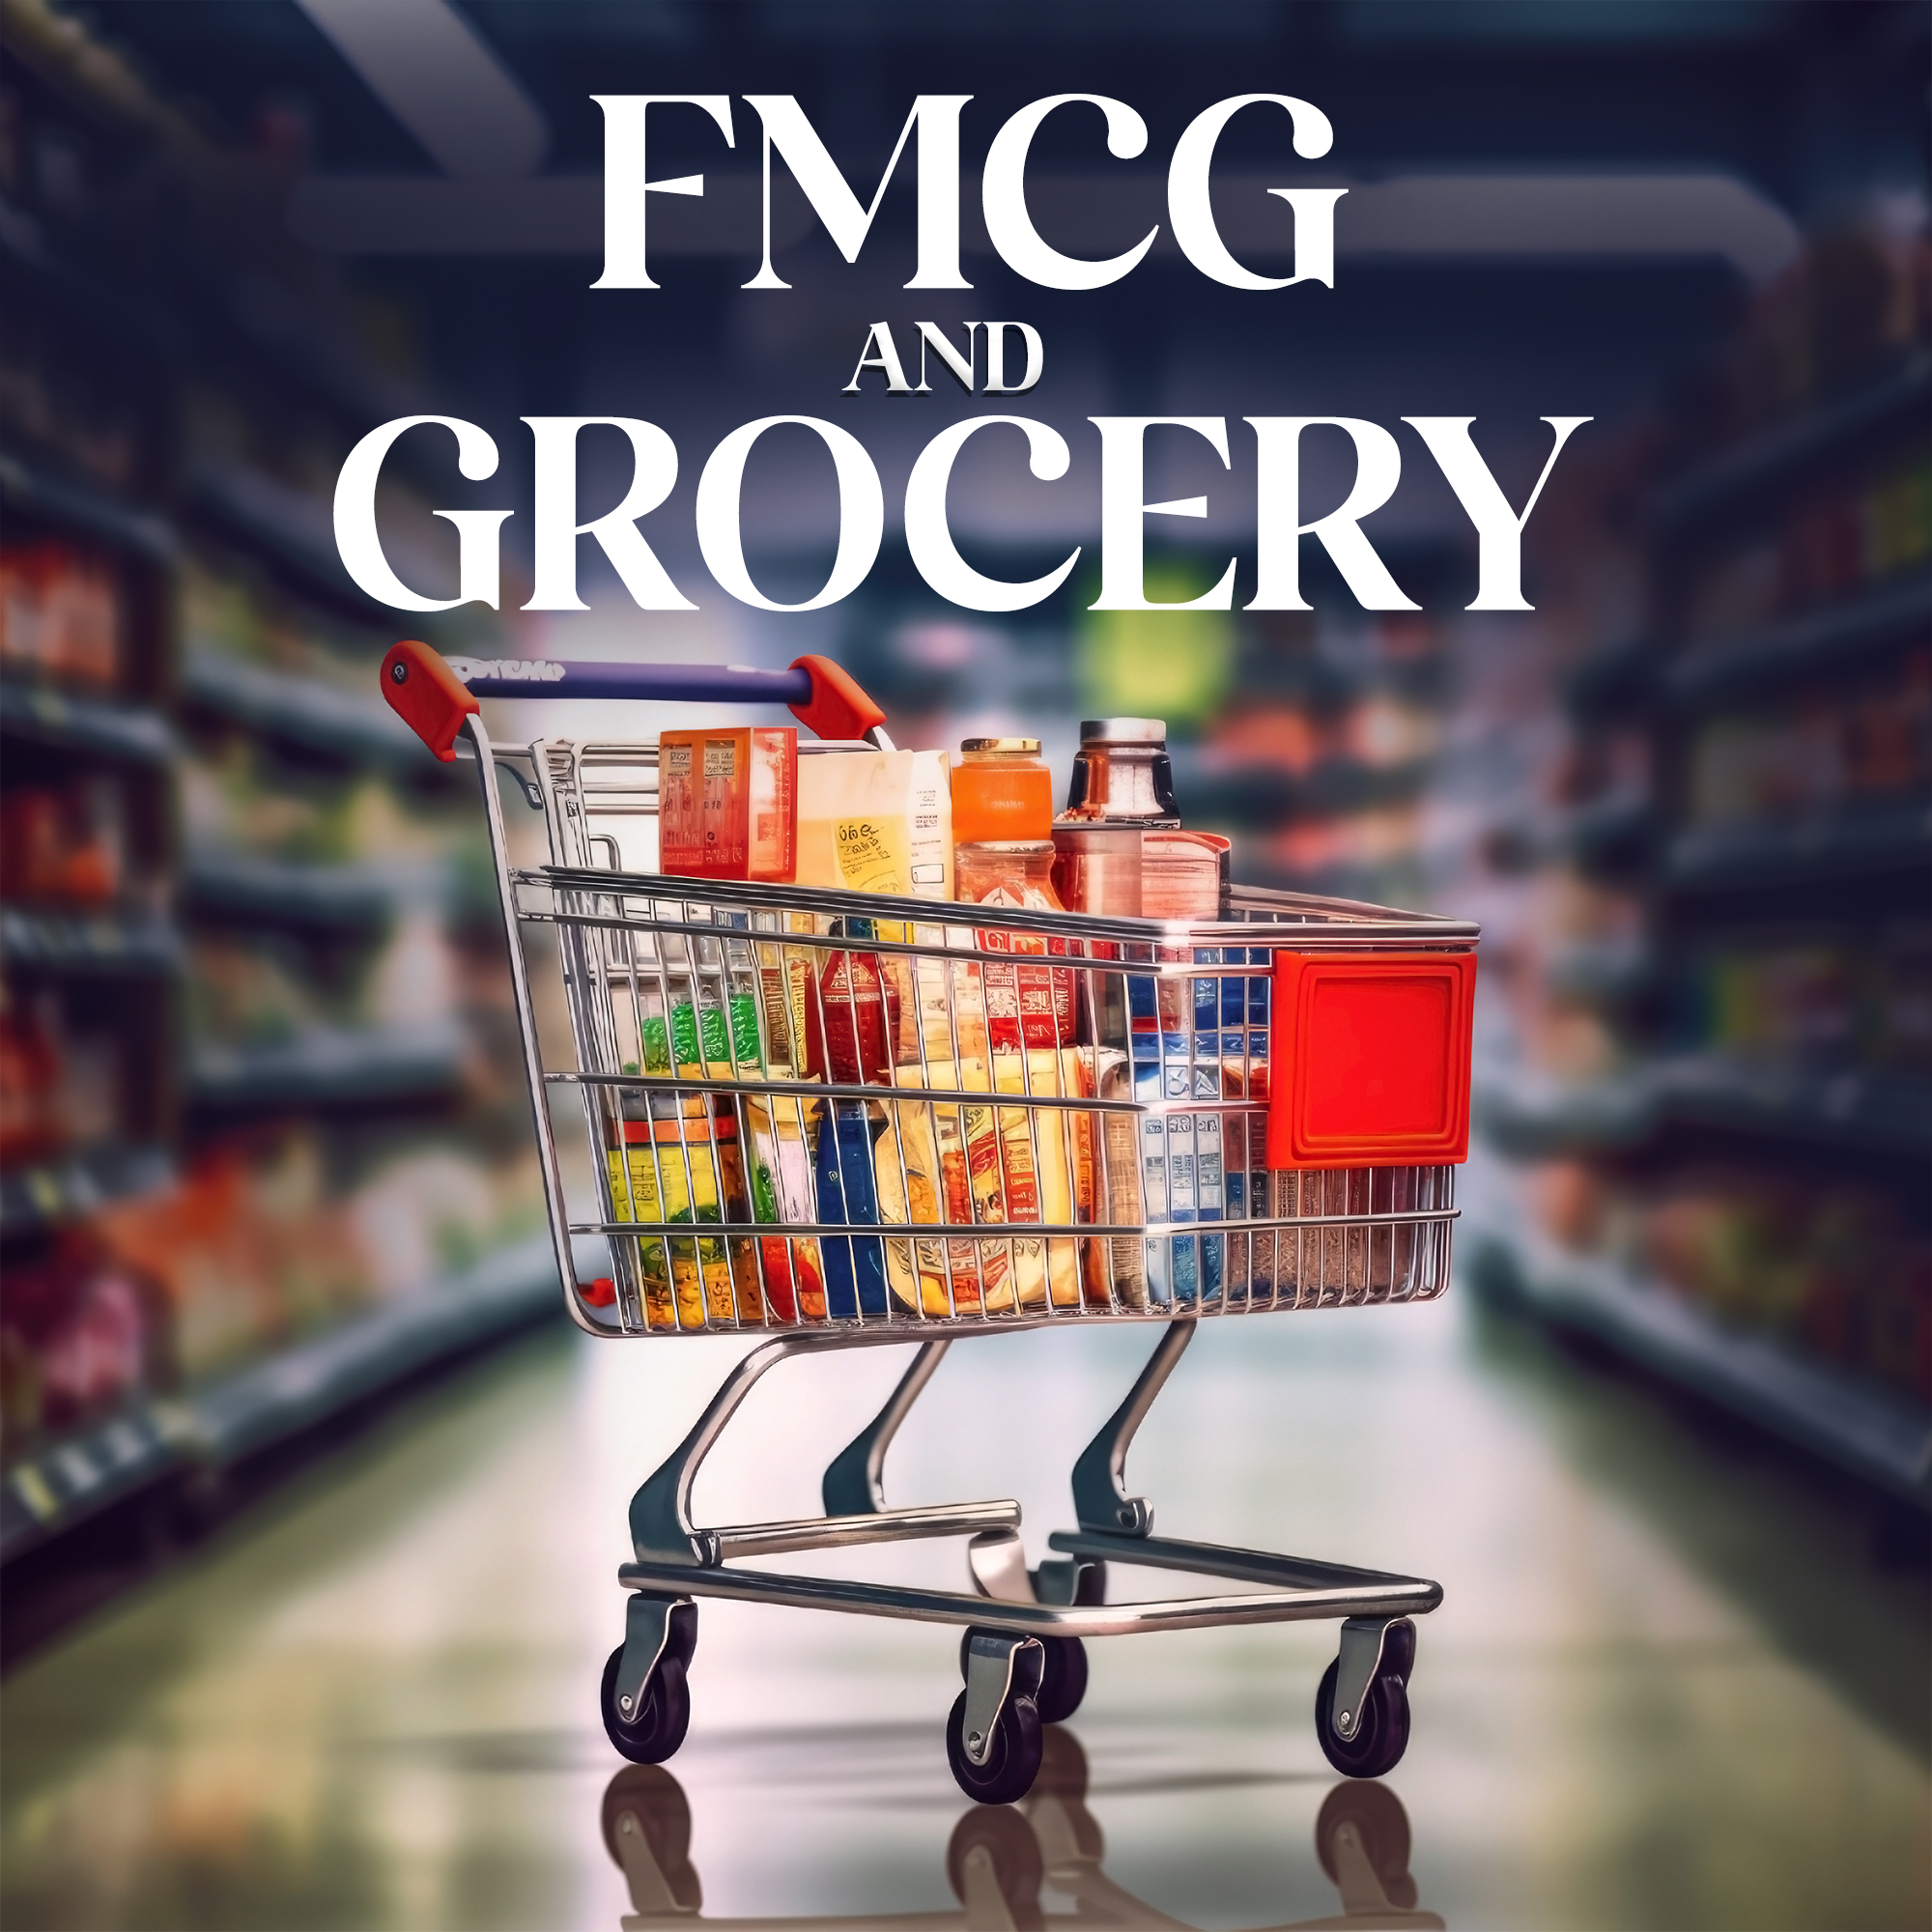 FMCG and Grocery